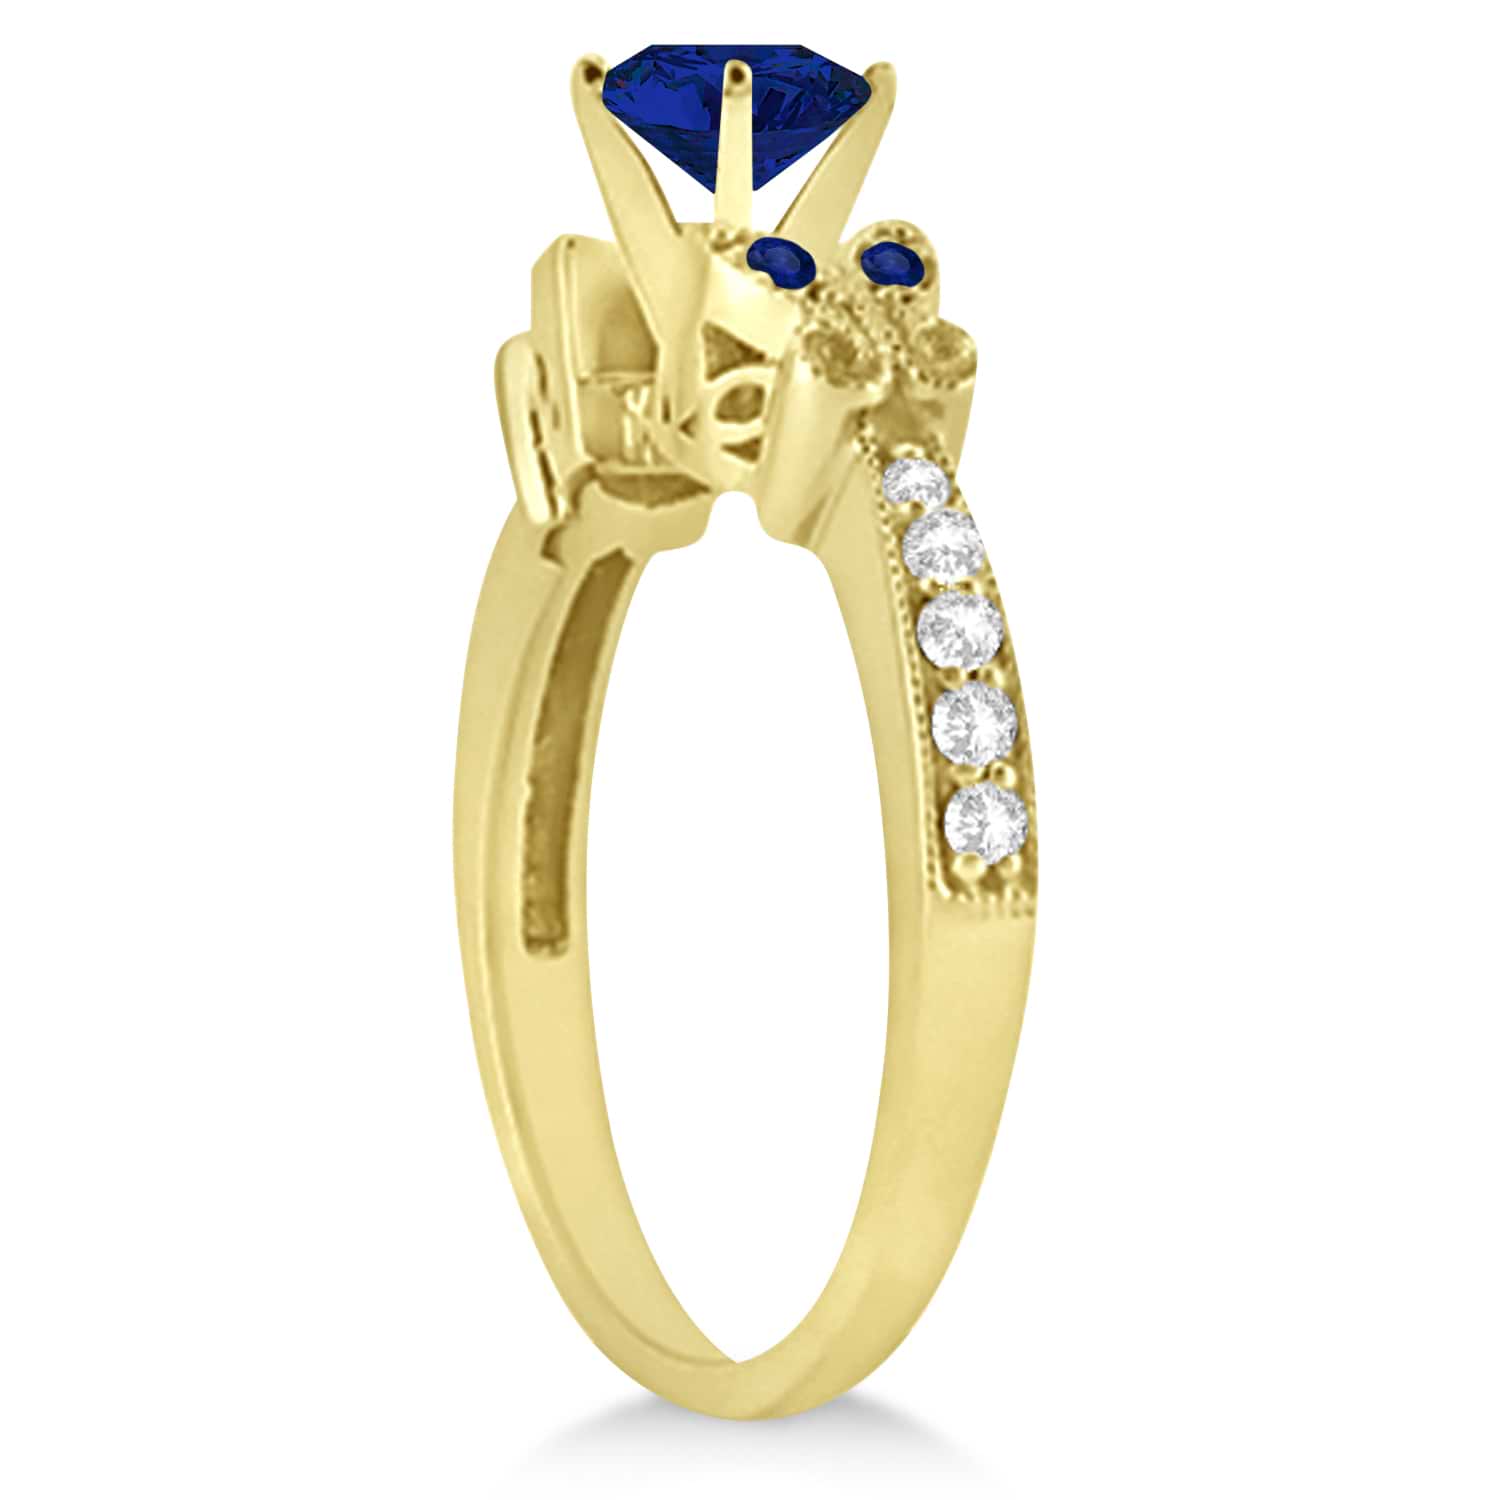 Butterfly Blue Sapphire & Diamond Engagement Ring 14k Yellow Gold (1.83ct)